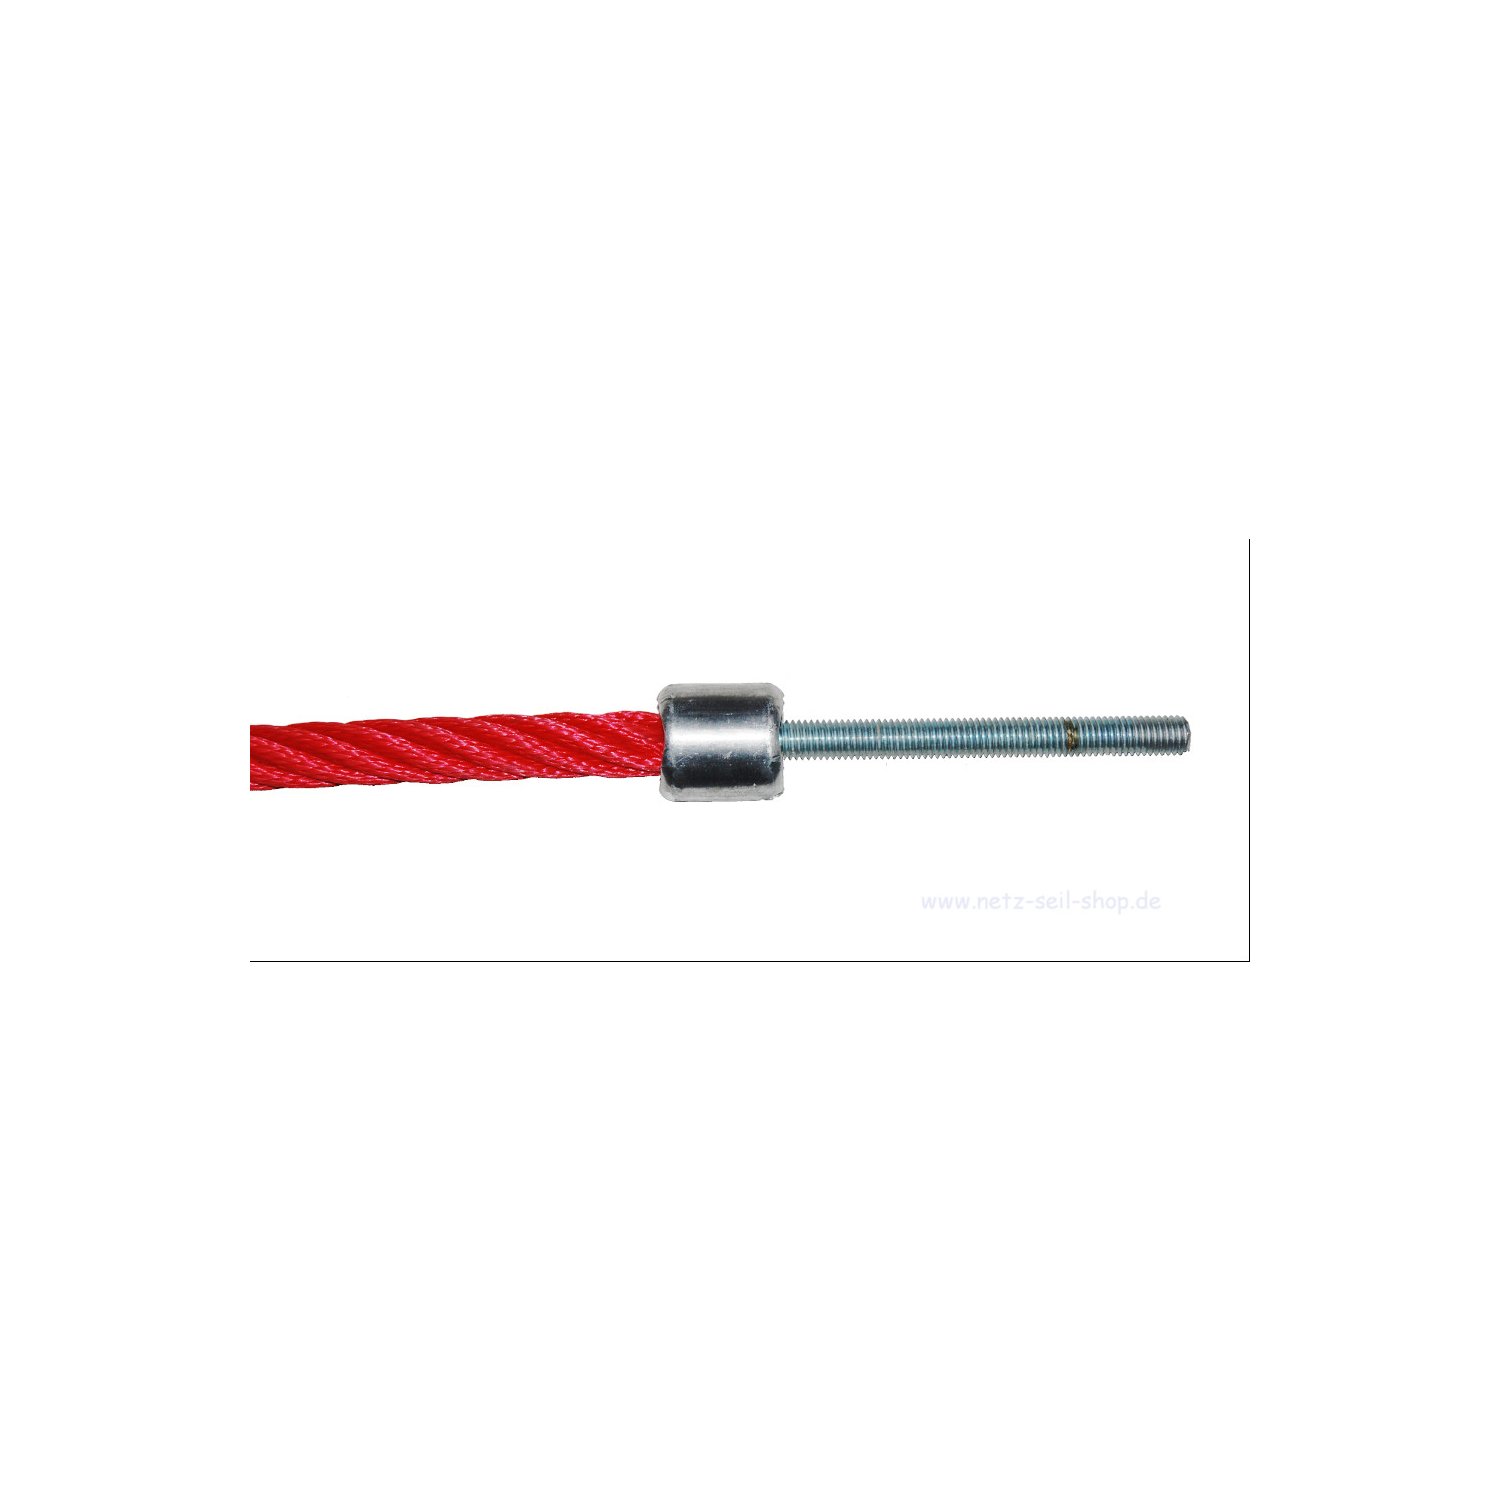 Threaded bolt M12 x 100 mm, galvanised, directly pressed [11,30 EUR]